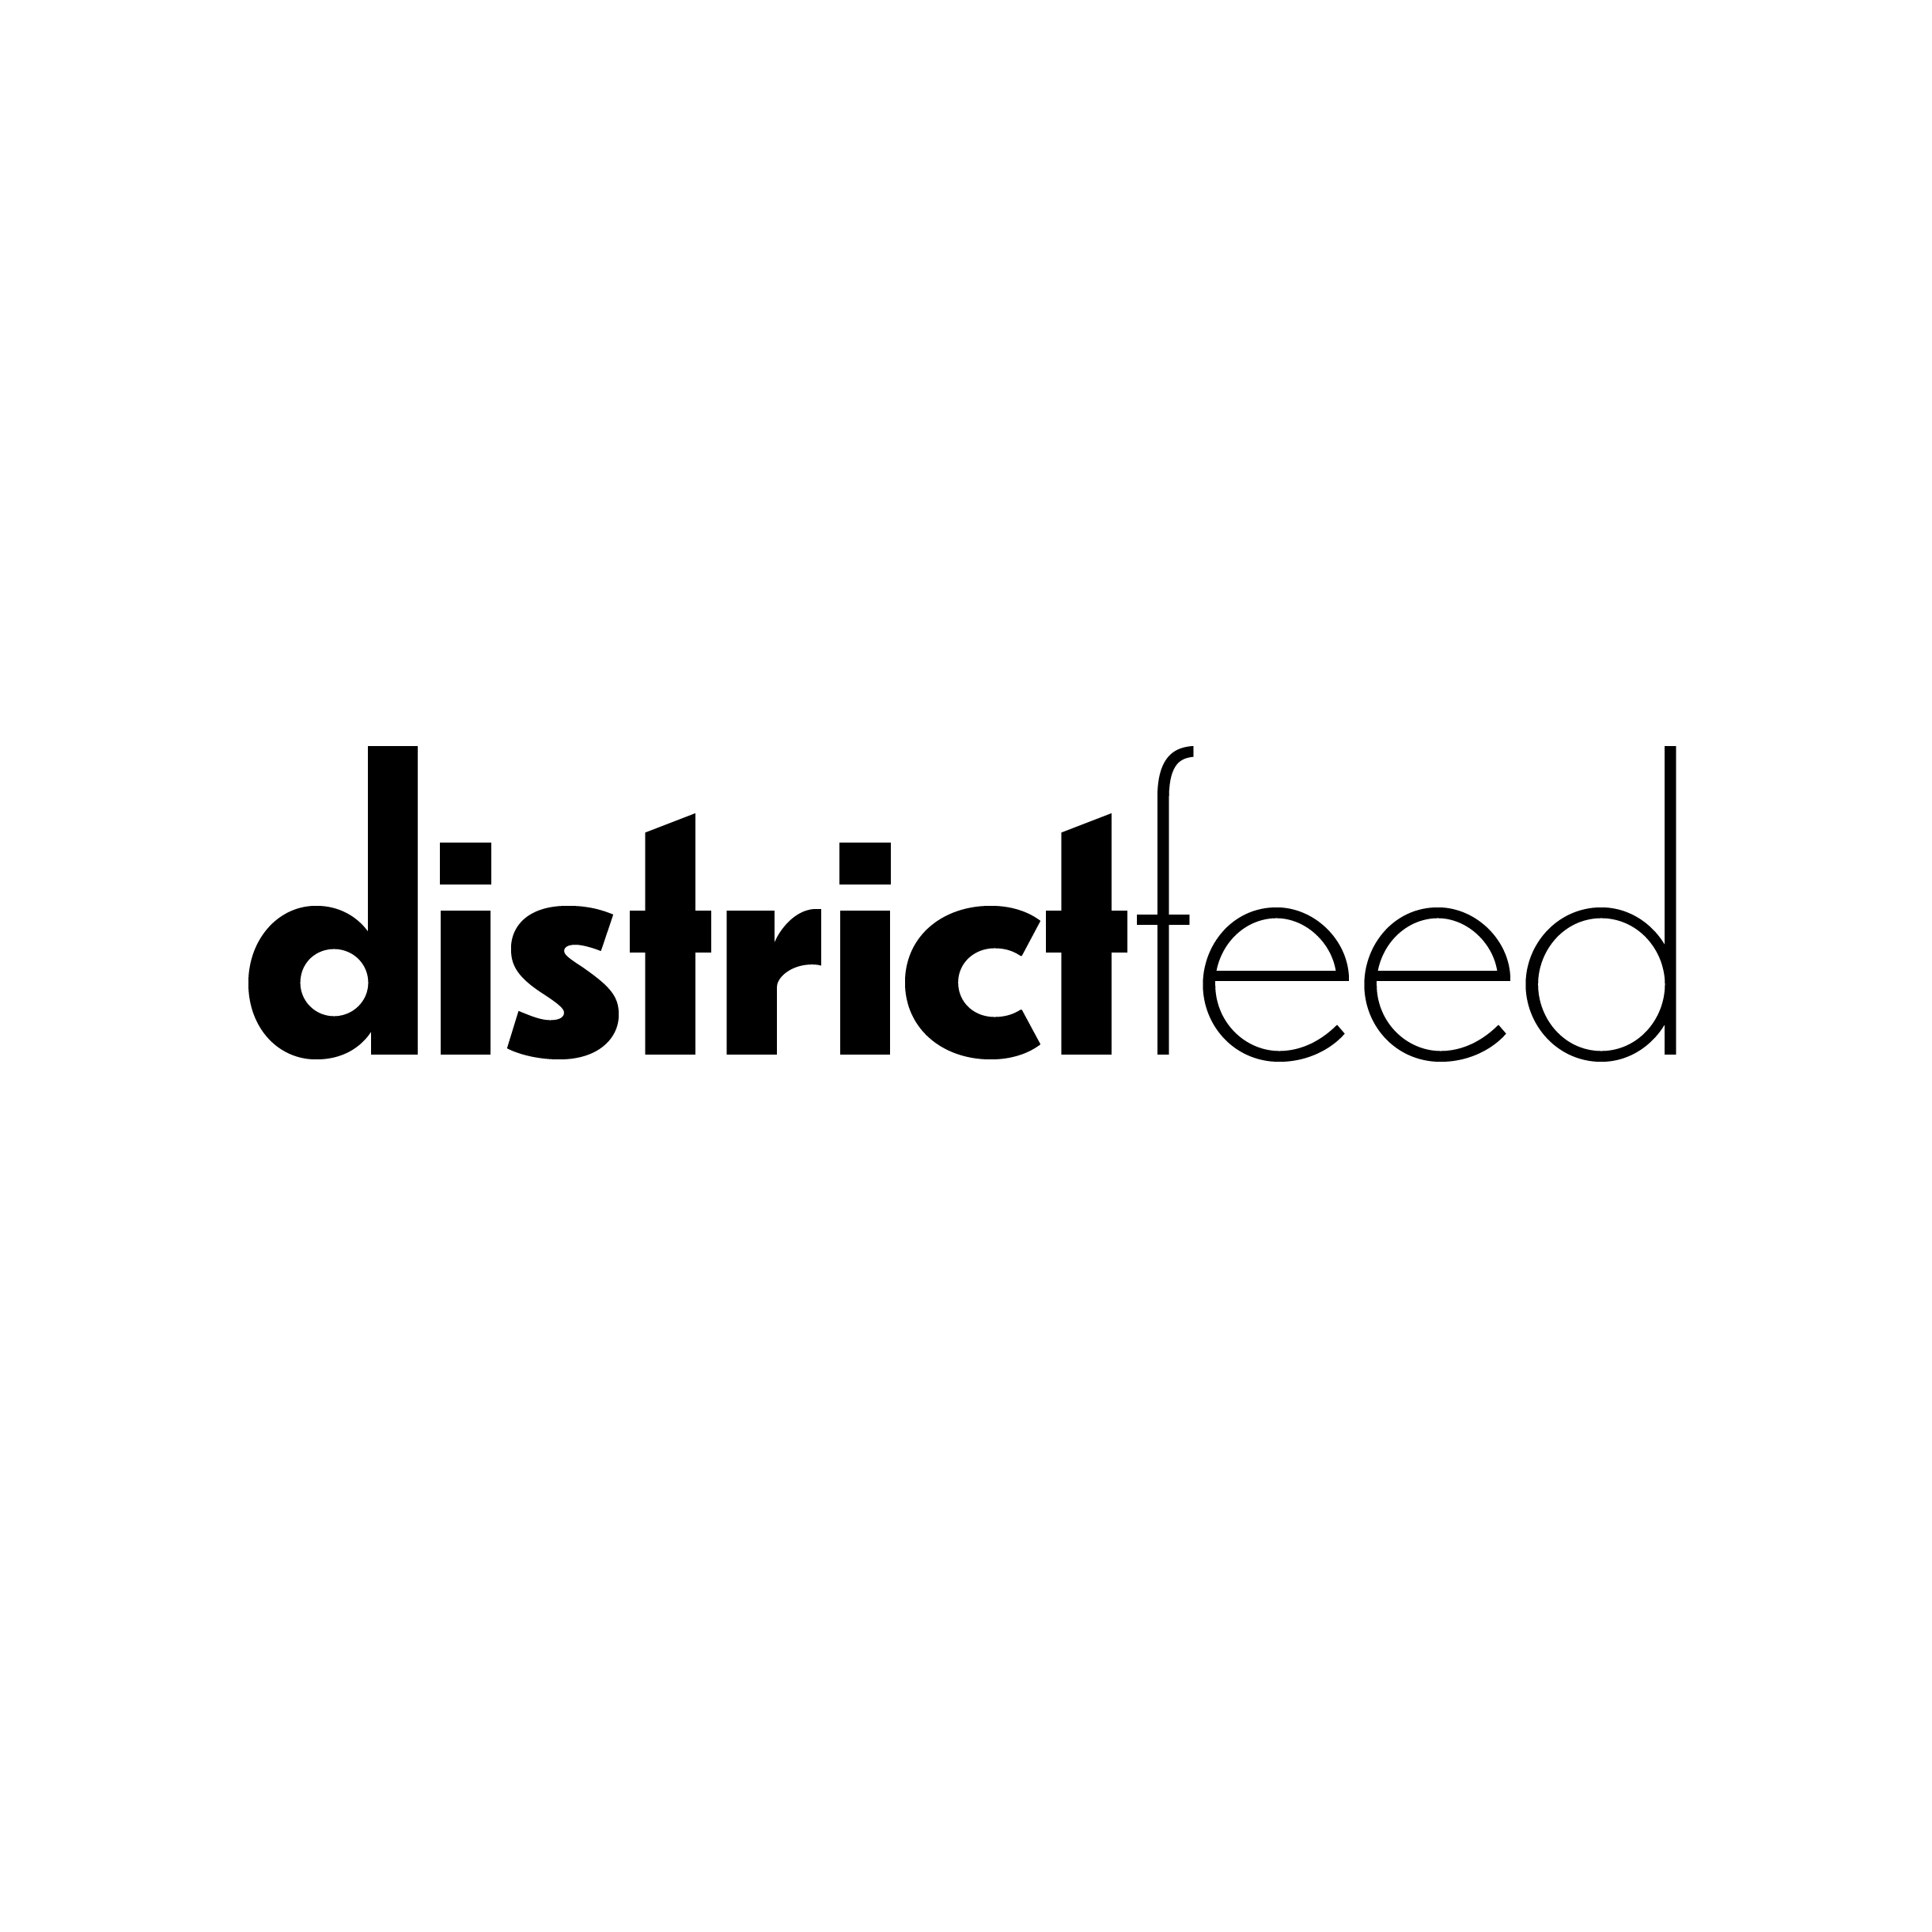 District Feed profile on Qualified.One